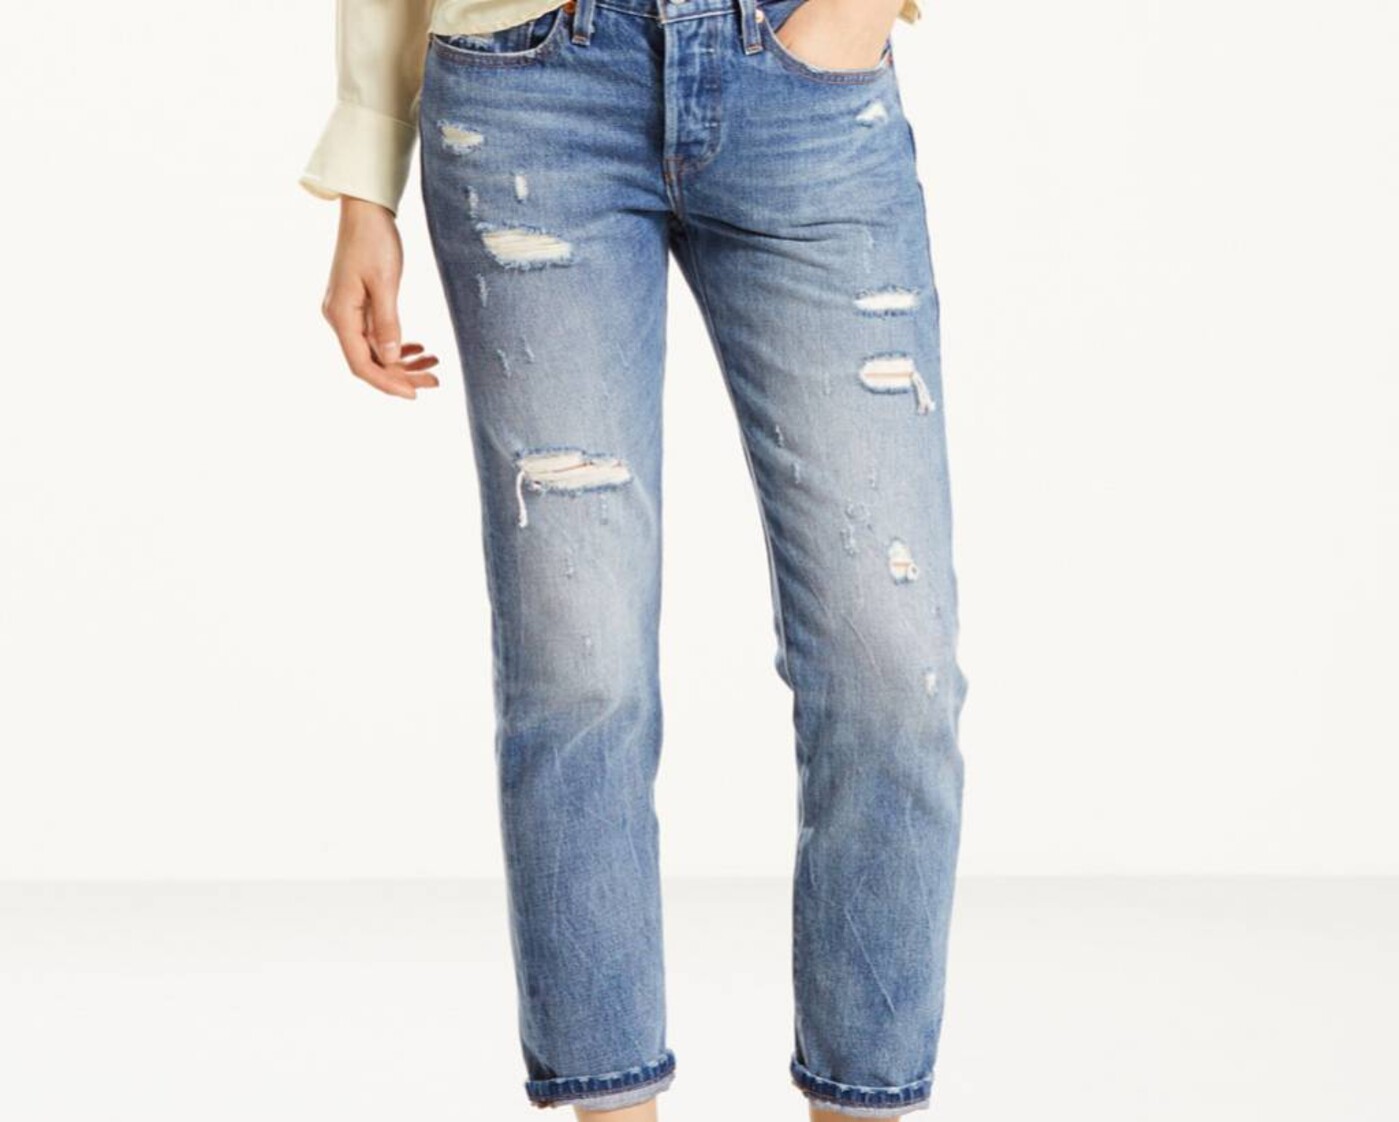 LEVI'S Women's ICON FIT 22861-0024 - Schreter's Clothing Store